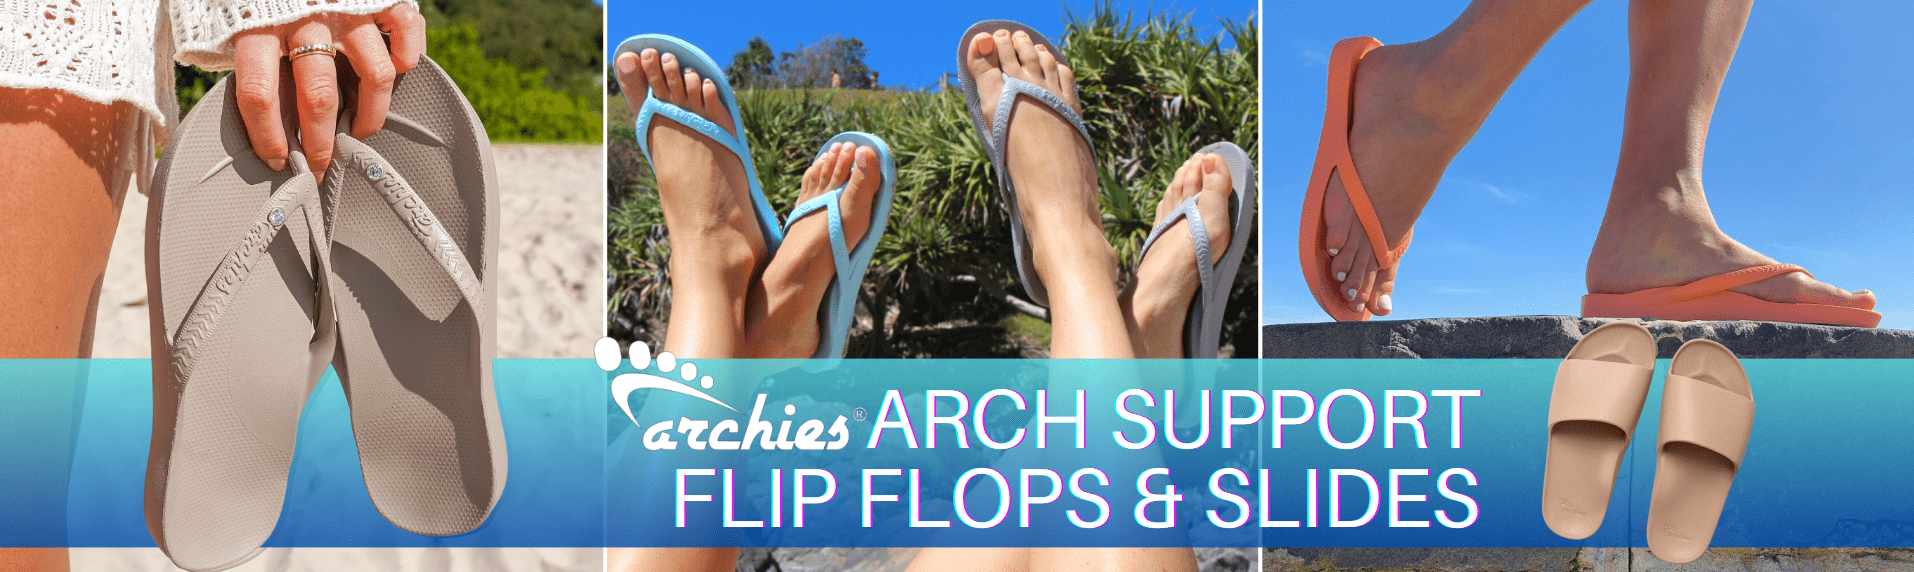 Archies Arch Support, Fargo ND Chiropractors